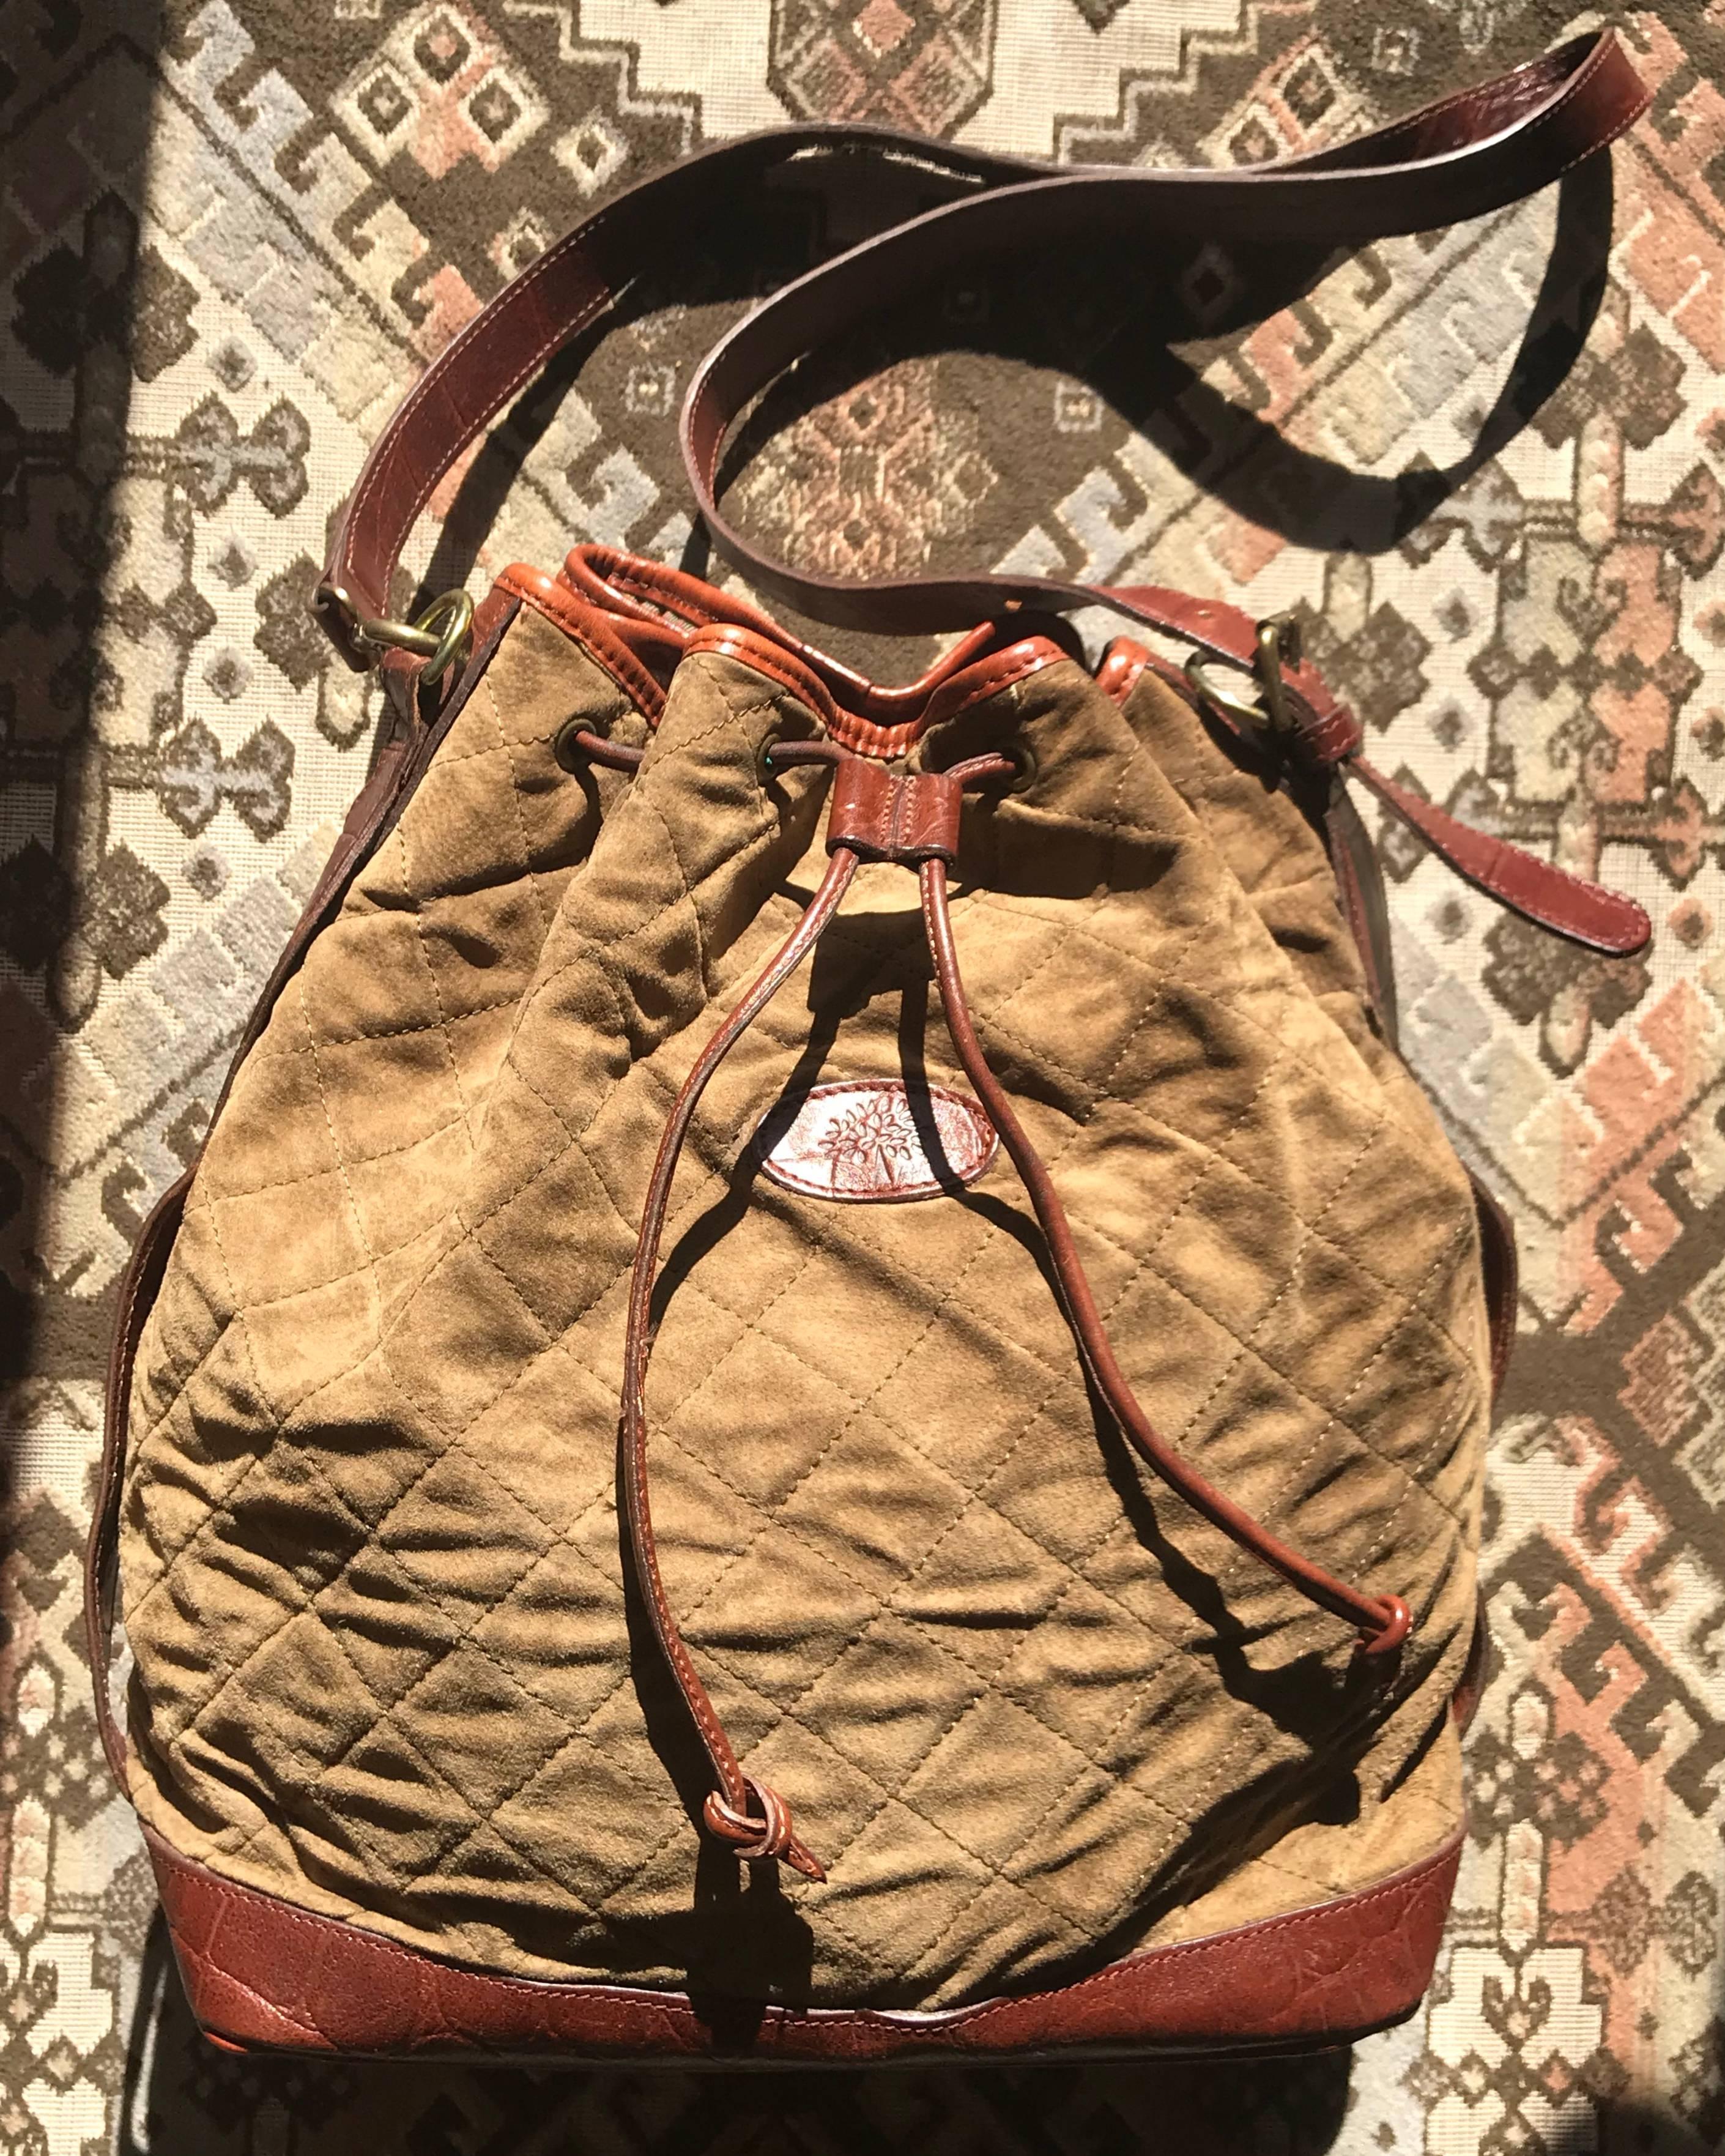 1990s. Vintage Mulberry brown khaki quilted suede leather bucket hobo bag with brown croc embossed shoulder strap. Unisex bag. Roger Saul era.

Introducing another beautiful vintage  masterpiece from Mulberry back in the early 90’s, Roger Saul